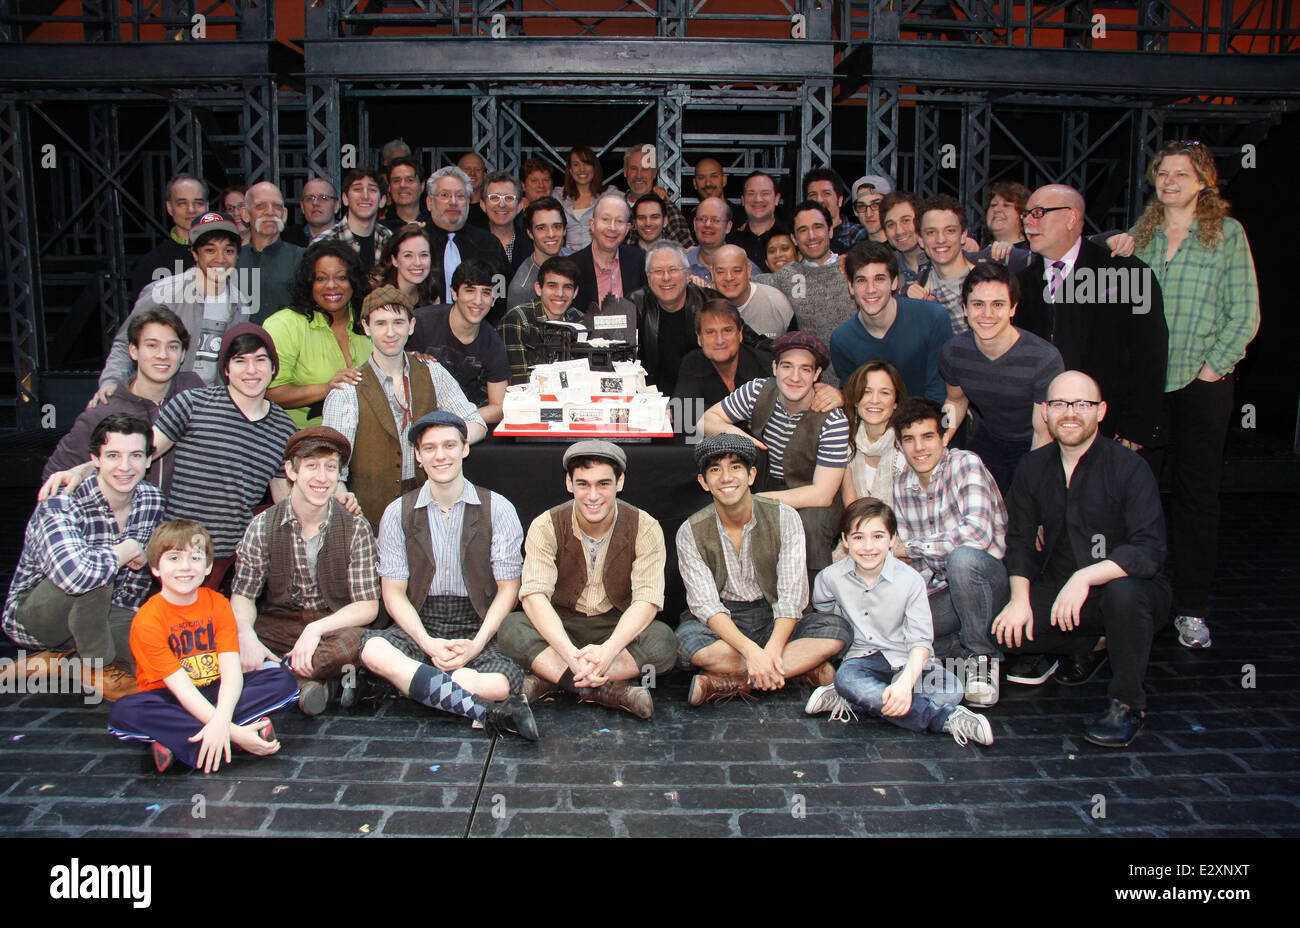 Cast And Creative Team Attend The First Anniversary Of The Disney Broadway Musical Newsies At The